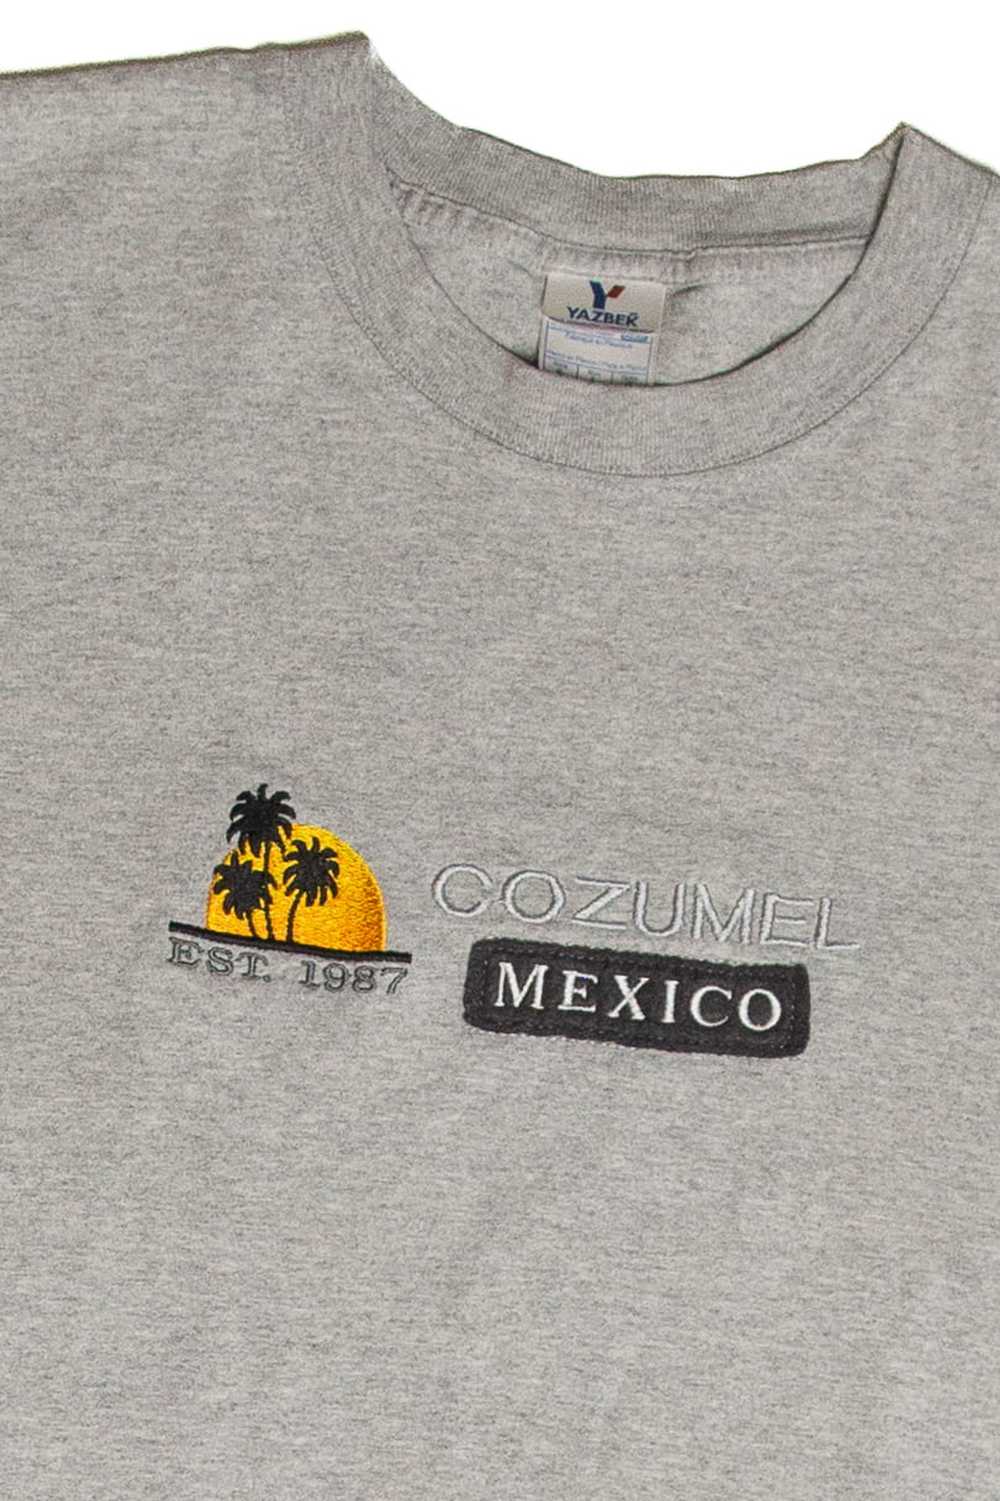 Vintage Cozumel Mexico Embroidered T-Shirt - image 2